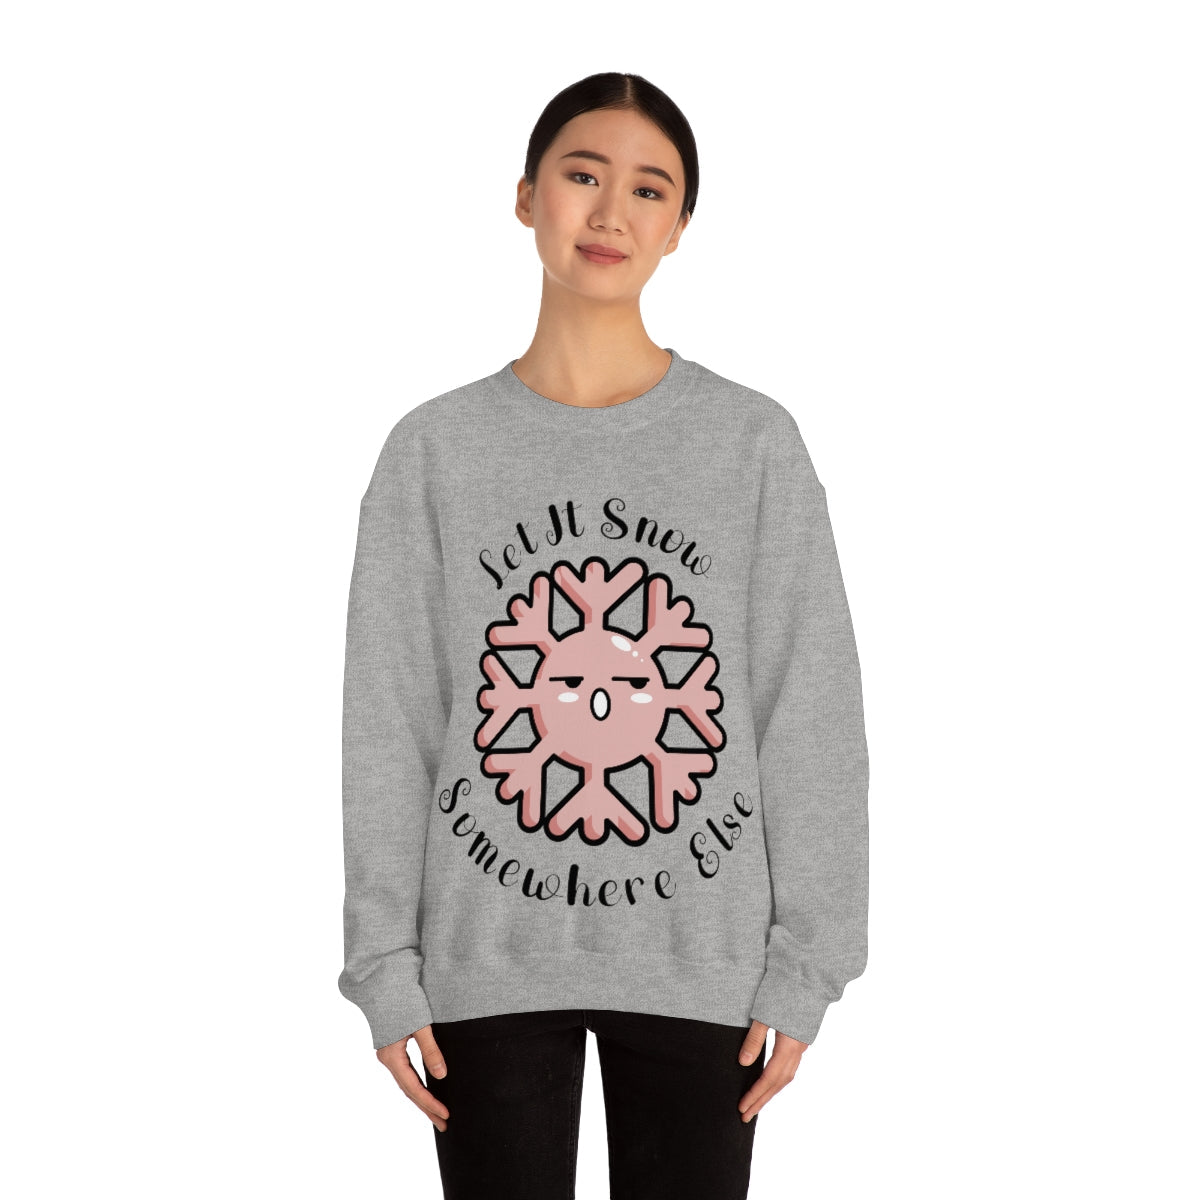 Kawaii Christmas Sweatshirt - Let It Snow Somewhere Else - Unisex from Art and Soule